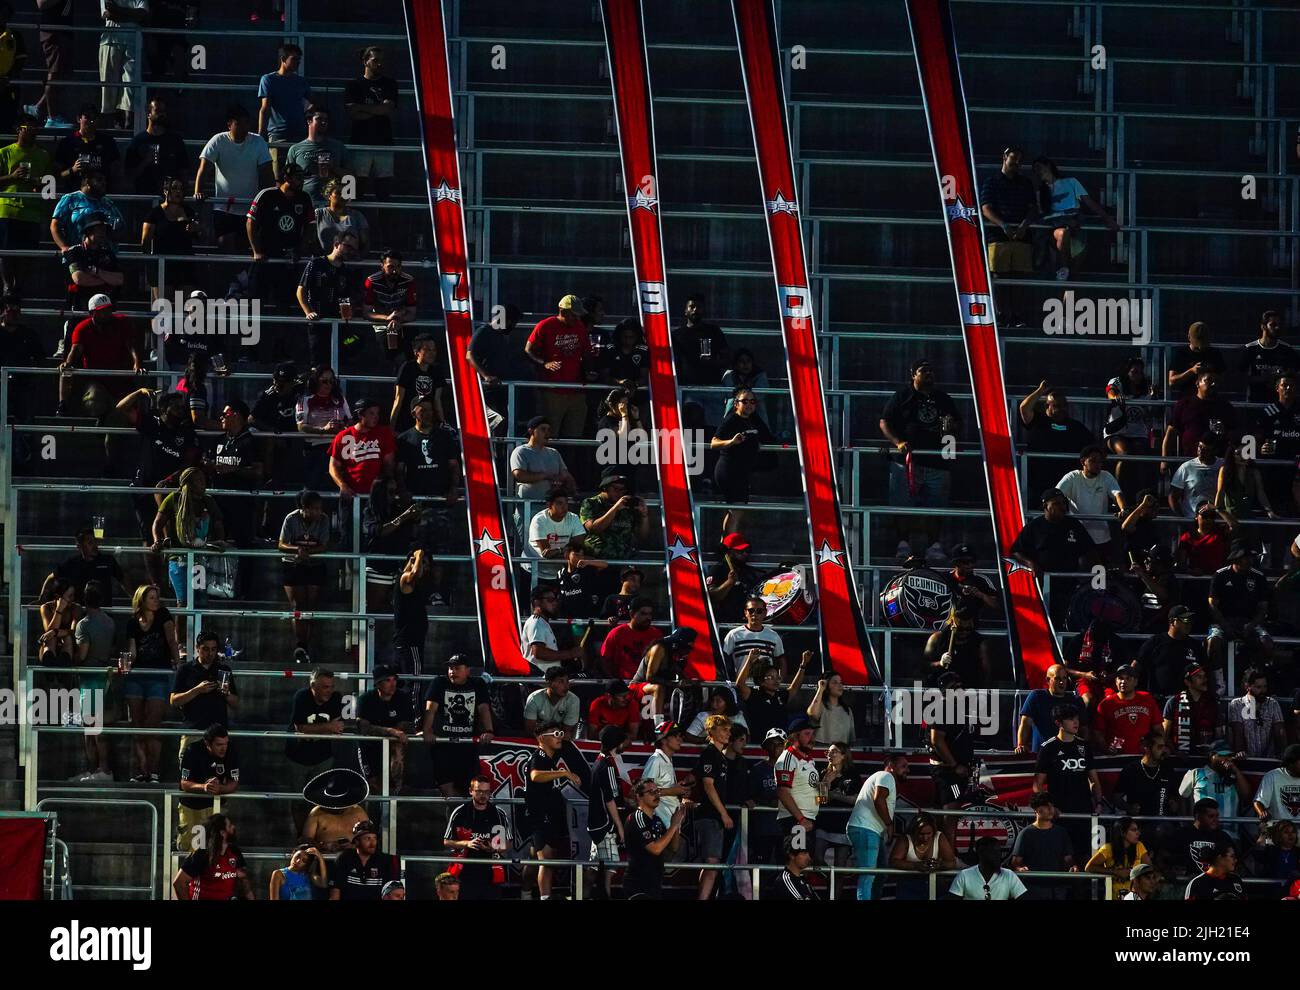 Banner in the fan section of a soccer stadium Stock Photo